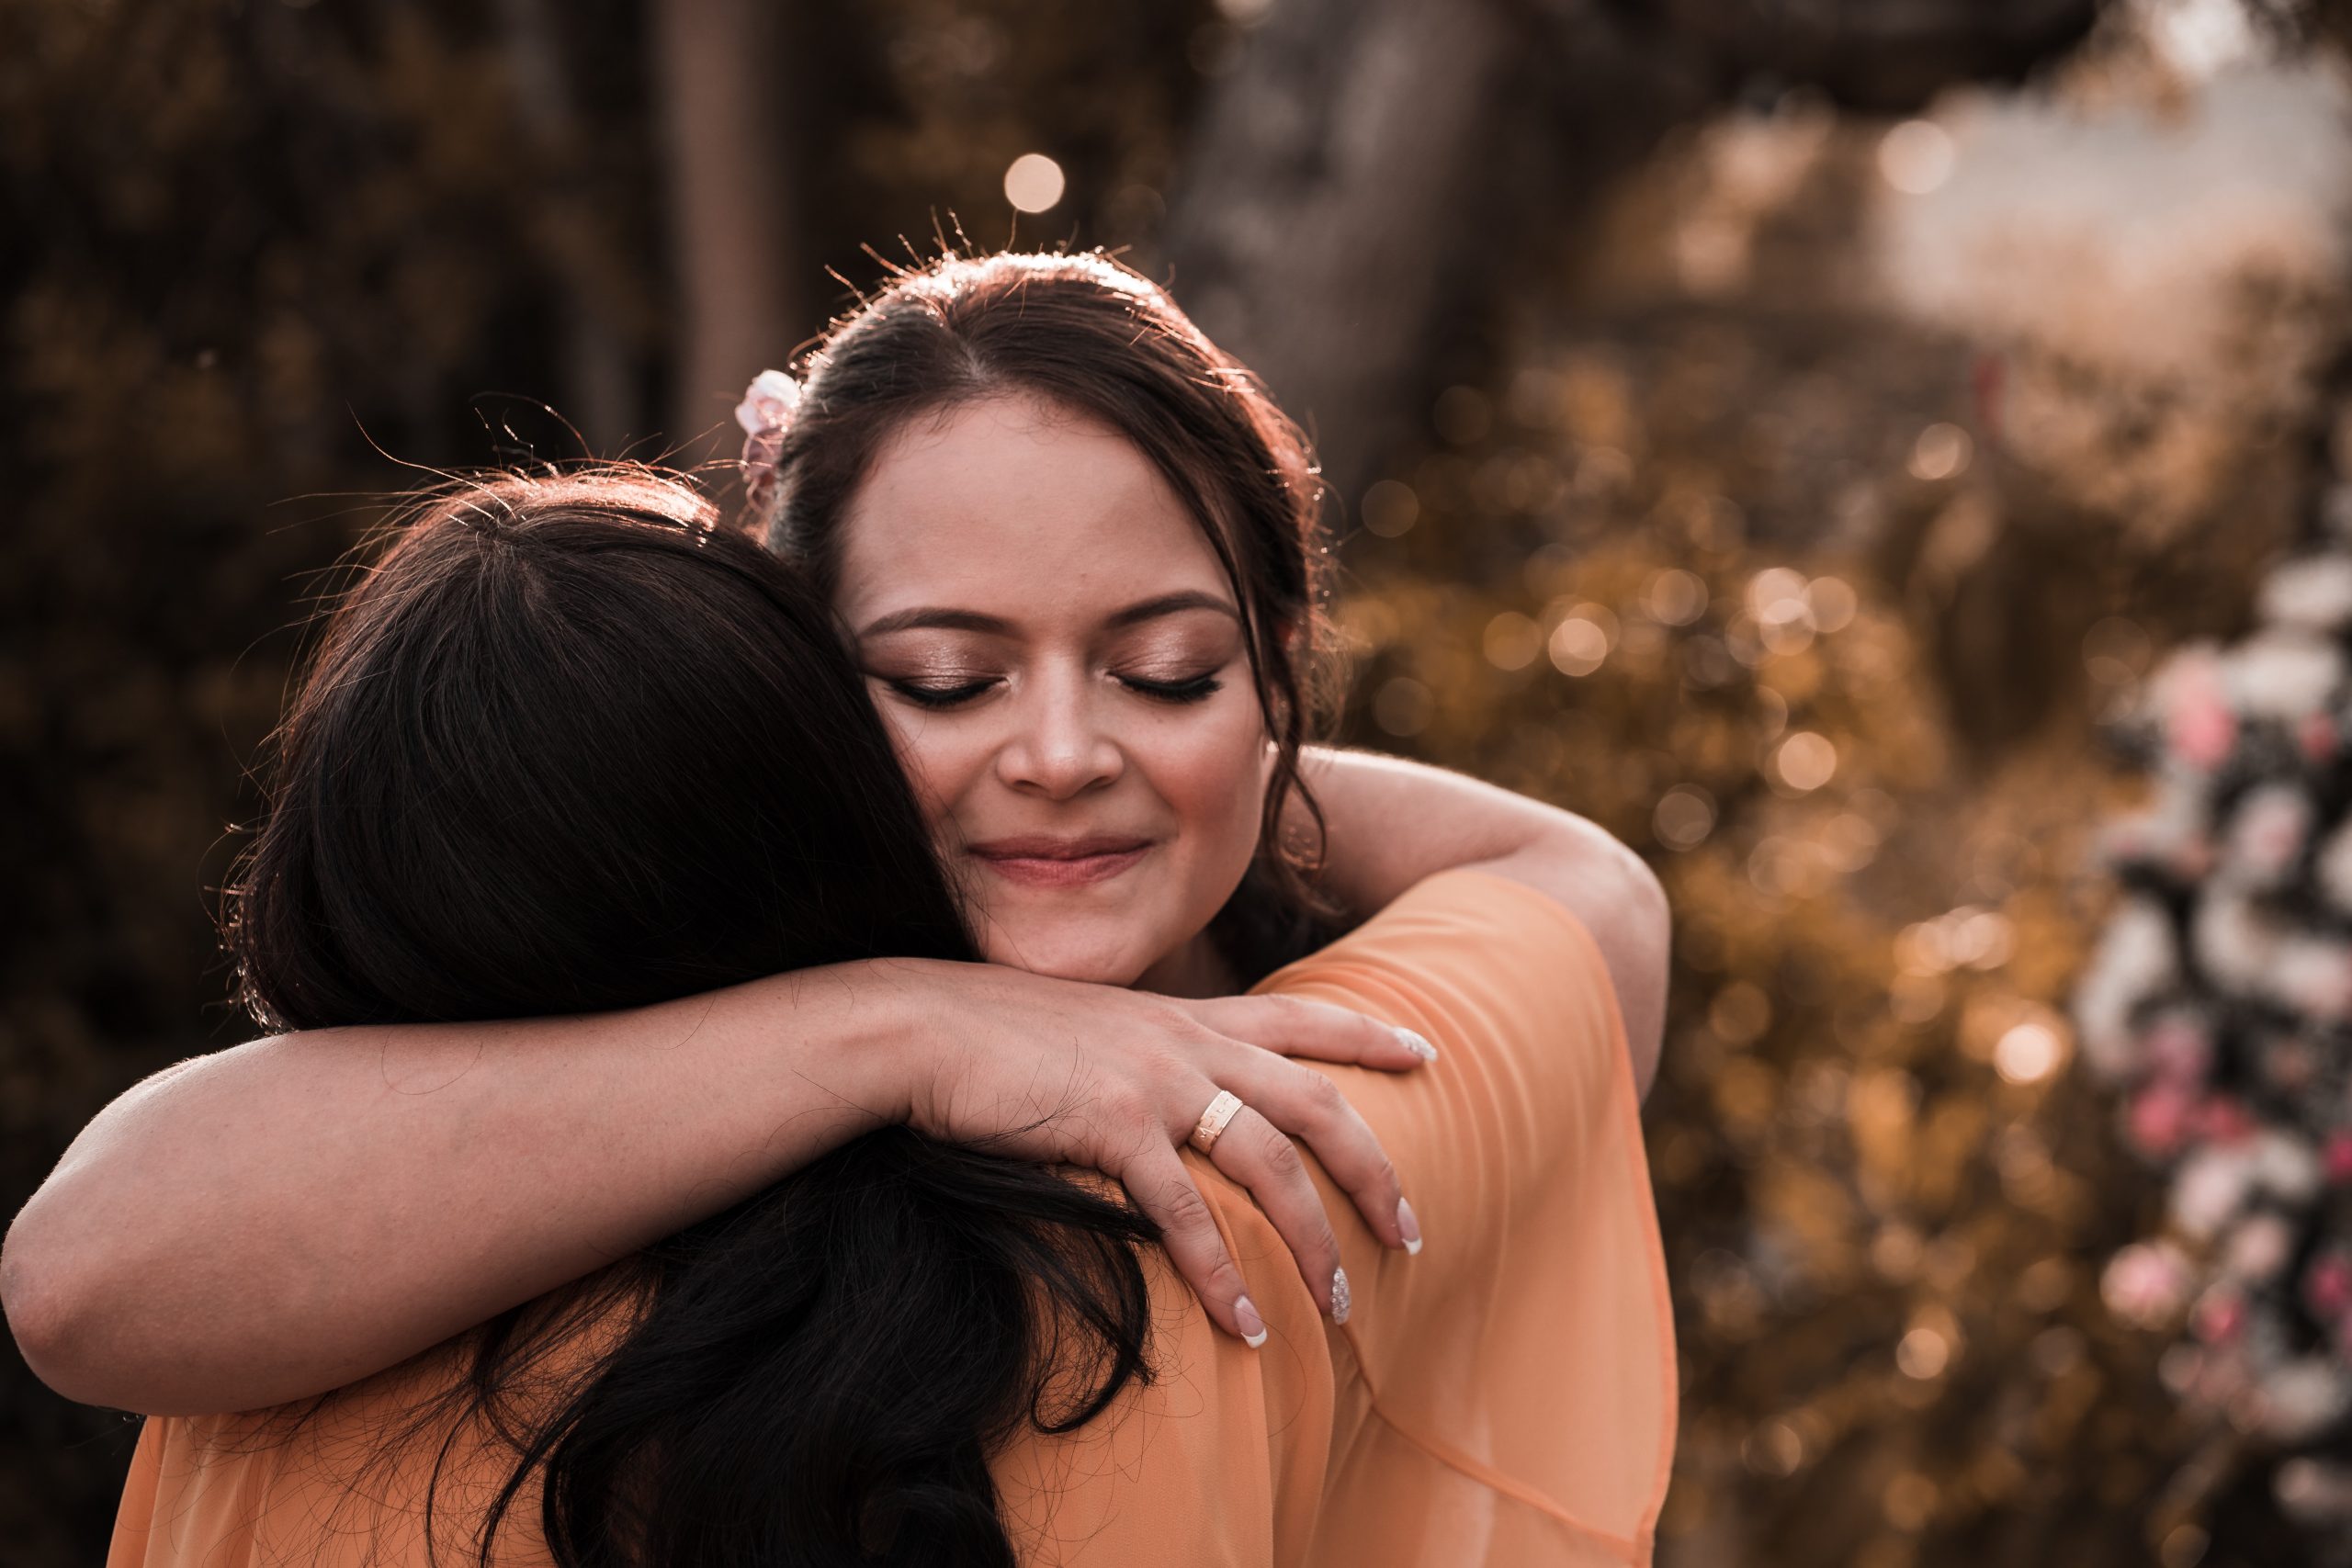 Two females hugging and supporting each other, practicing mindfulness